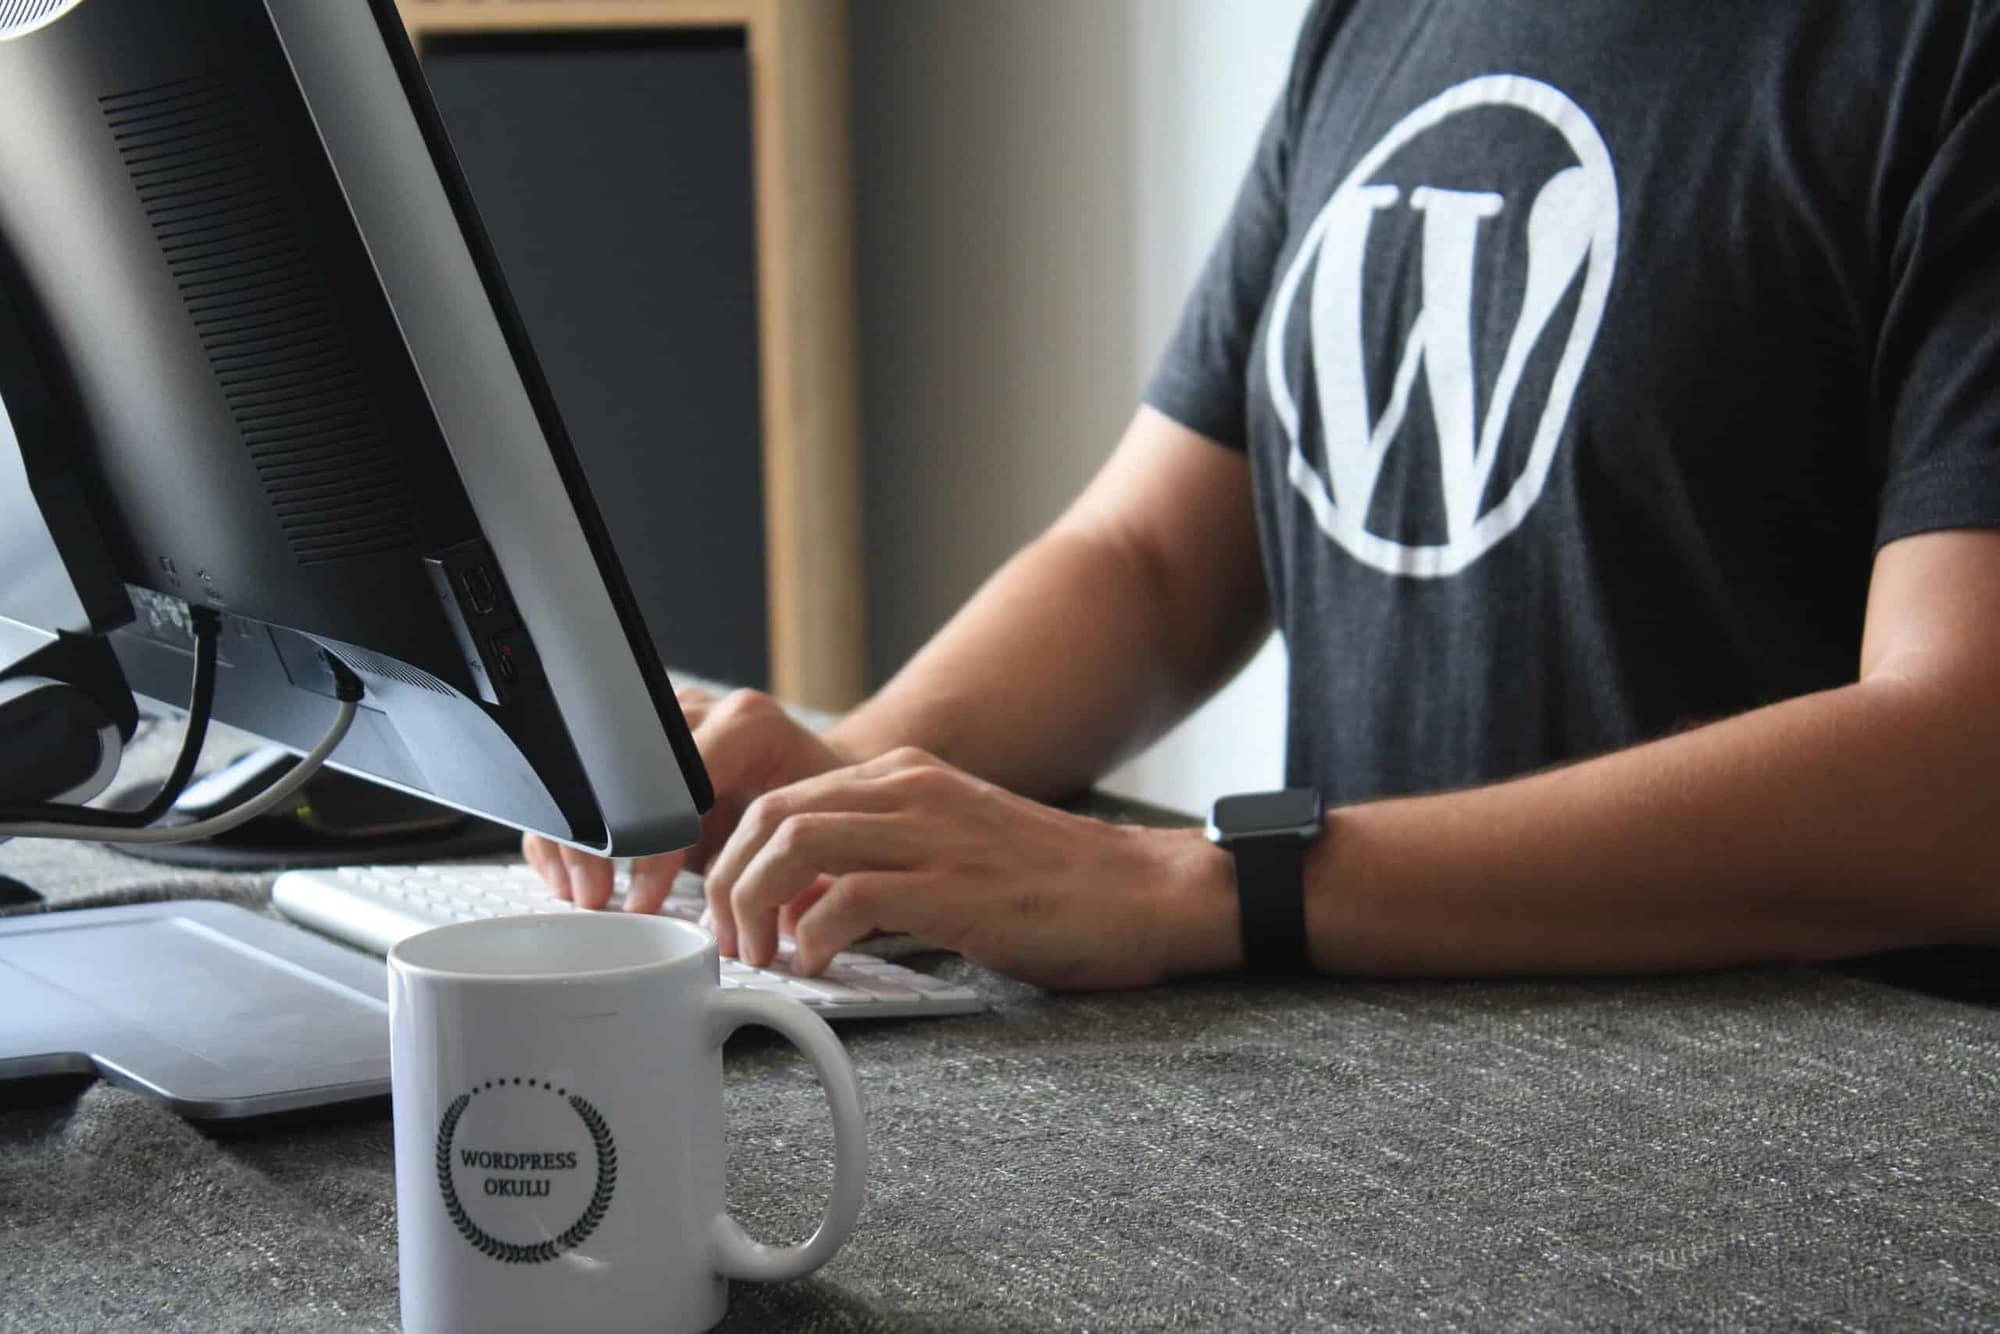 Why wordpress is great for custom websites